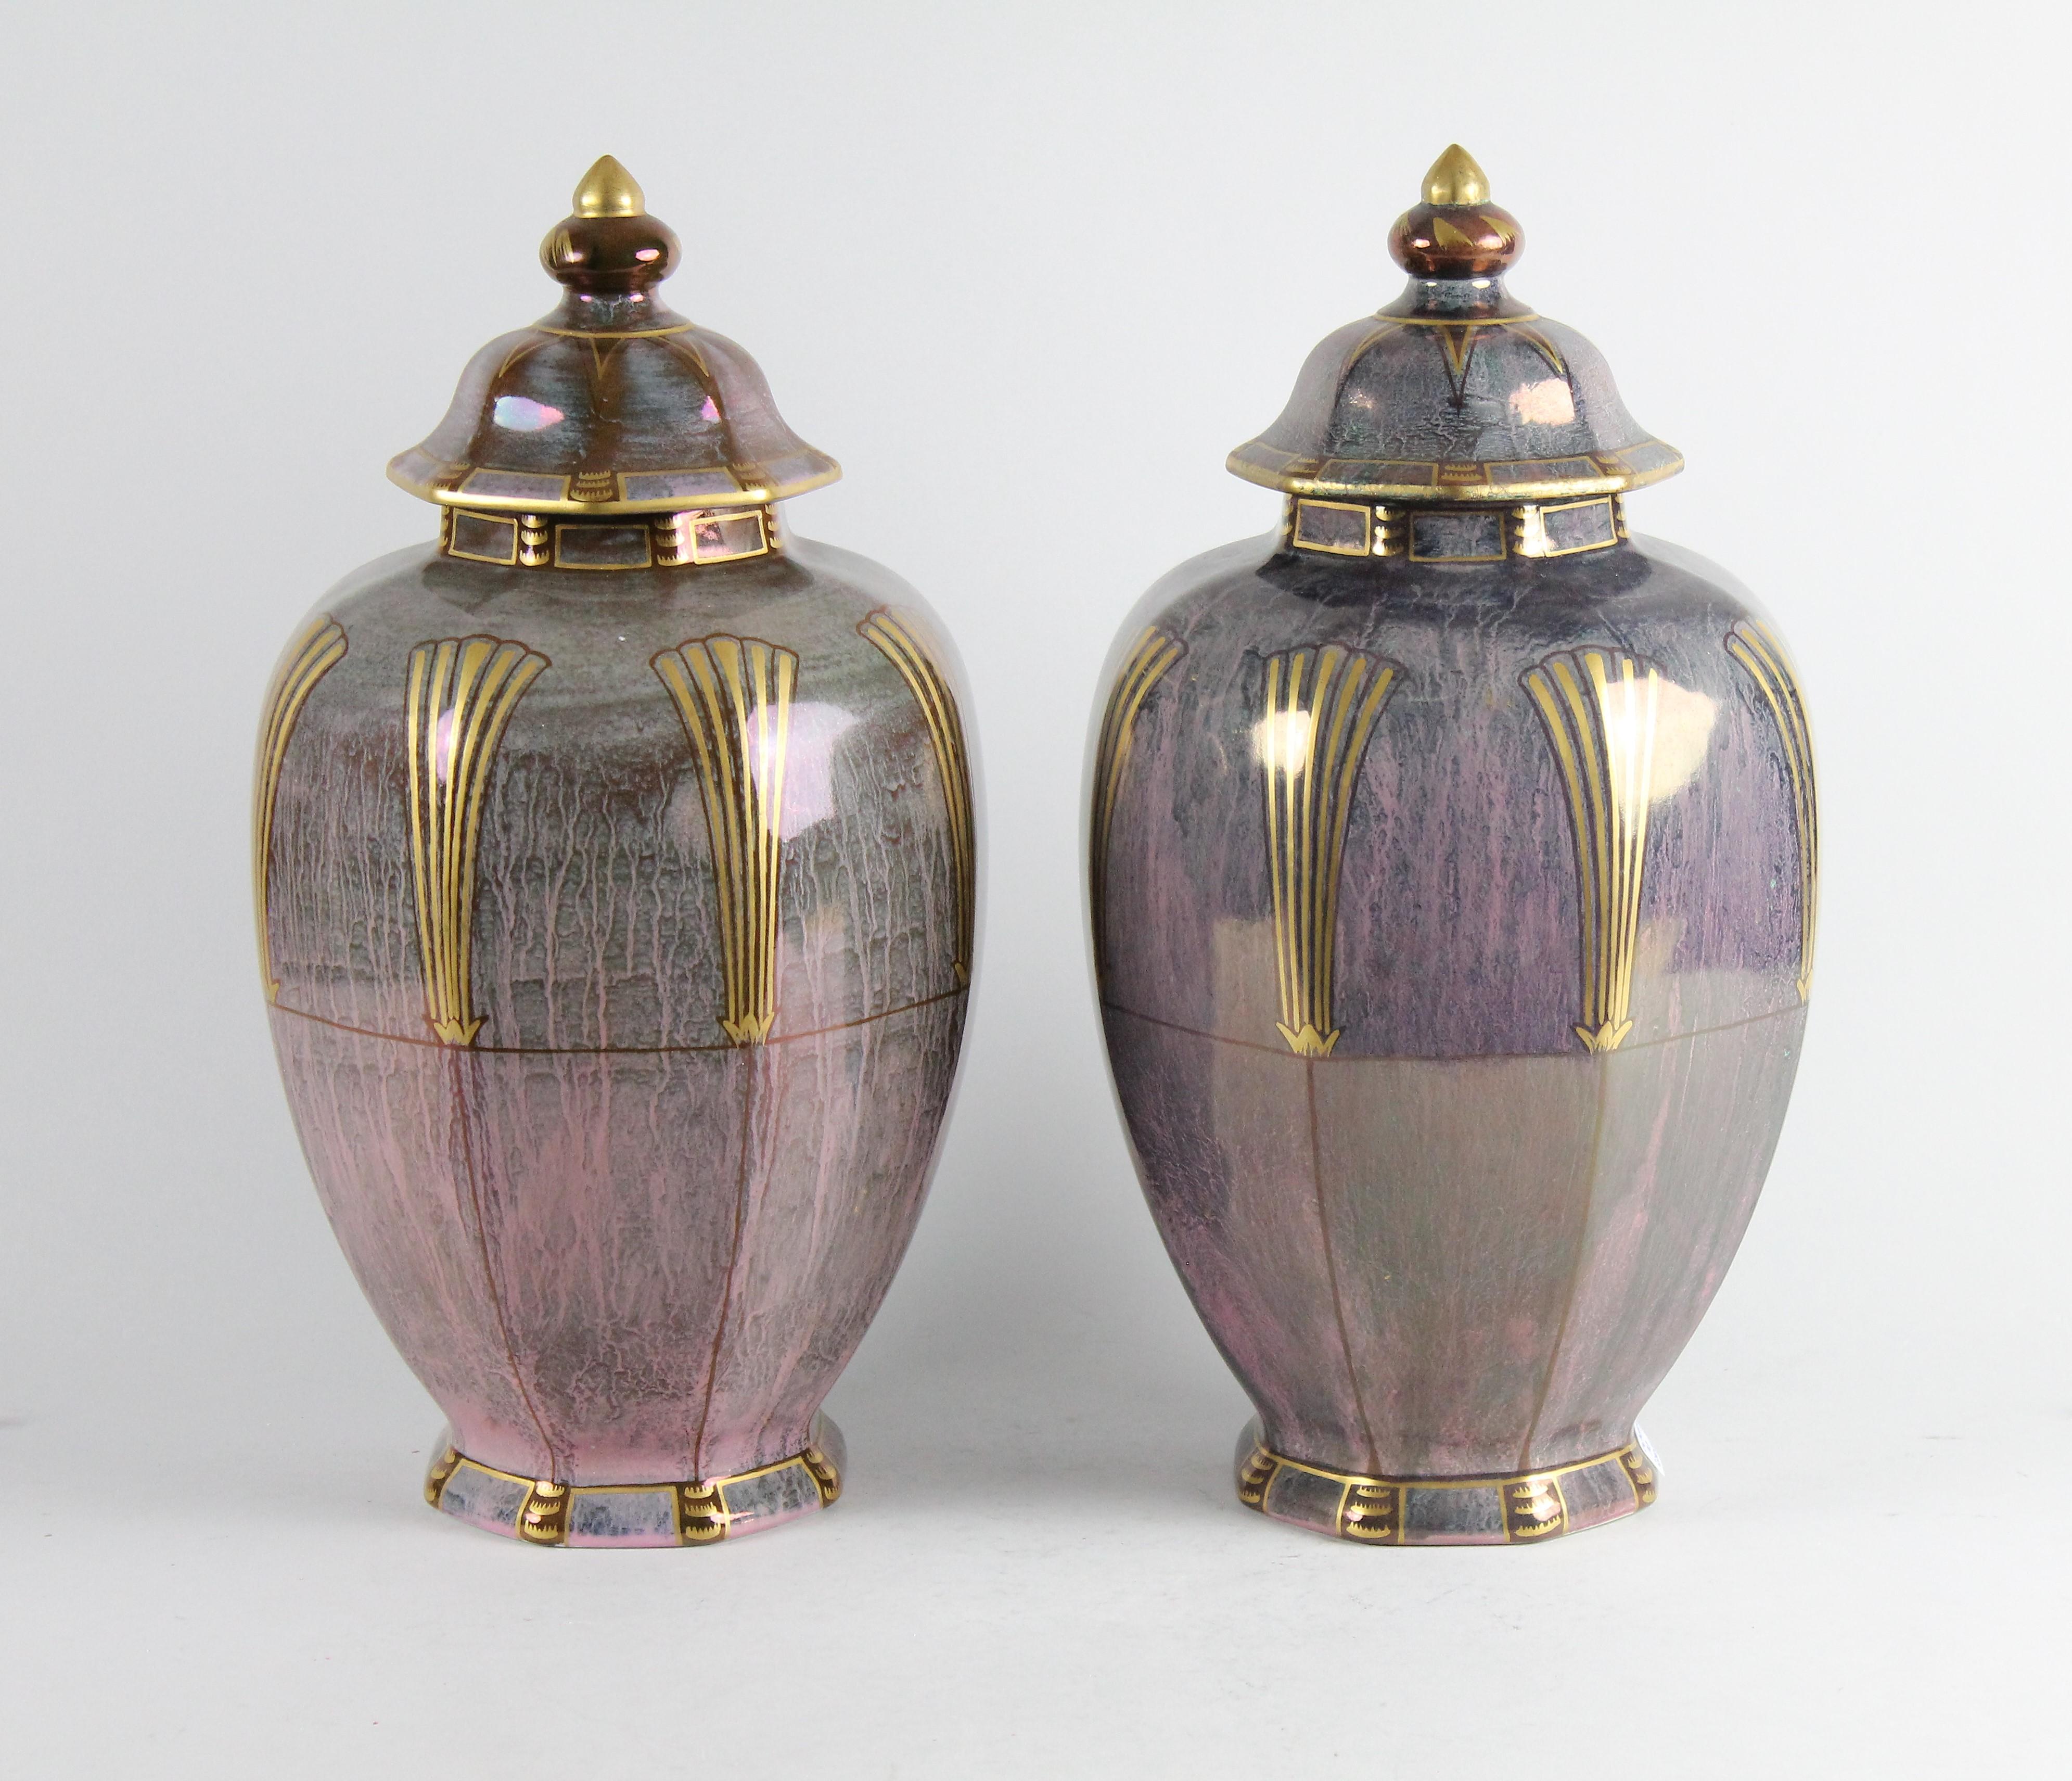 A very unusual pair of lidded urns by Swedish designer Josef Ekberg.
Signed with Josef Ekberg's monogram and Gustavsbergs company mark and also dated 1927.
Handpainted creamware with luster glaze and gold decorations.
Really good condition, with